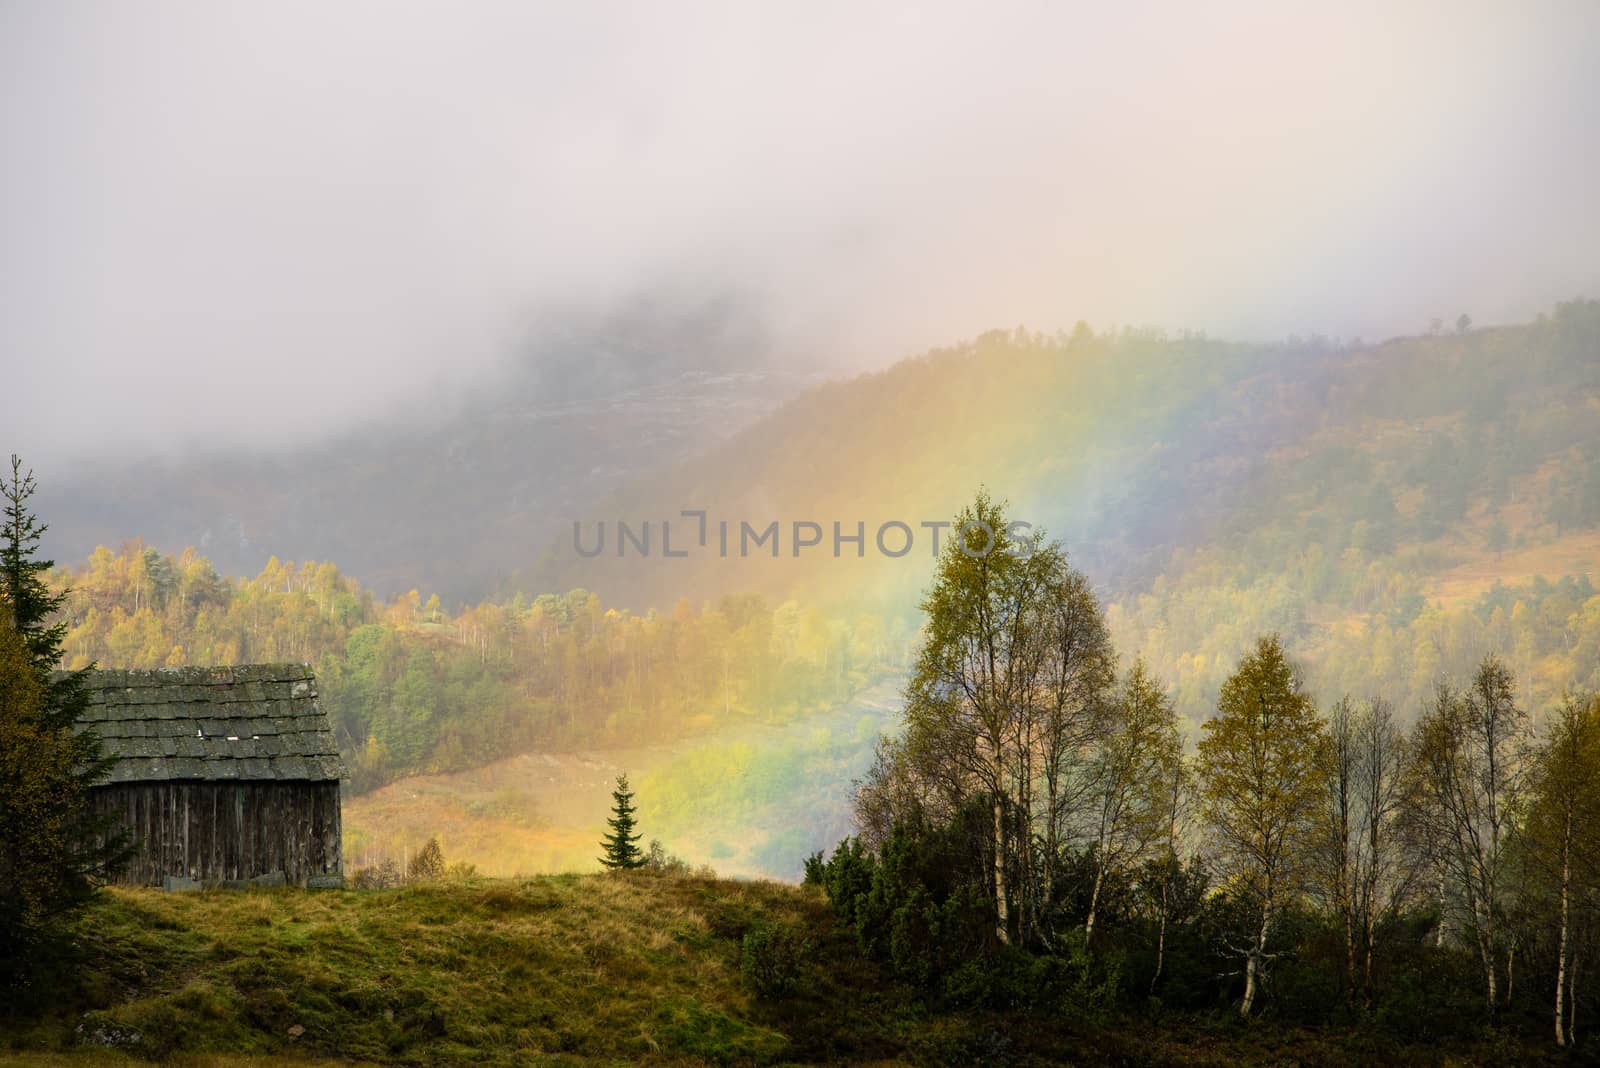 An old farm shed in the forest with a rainbow